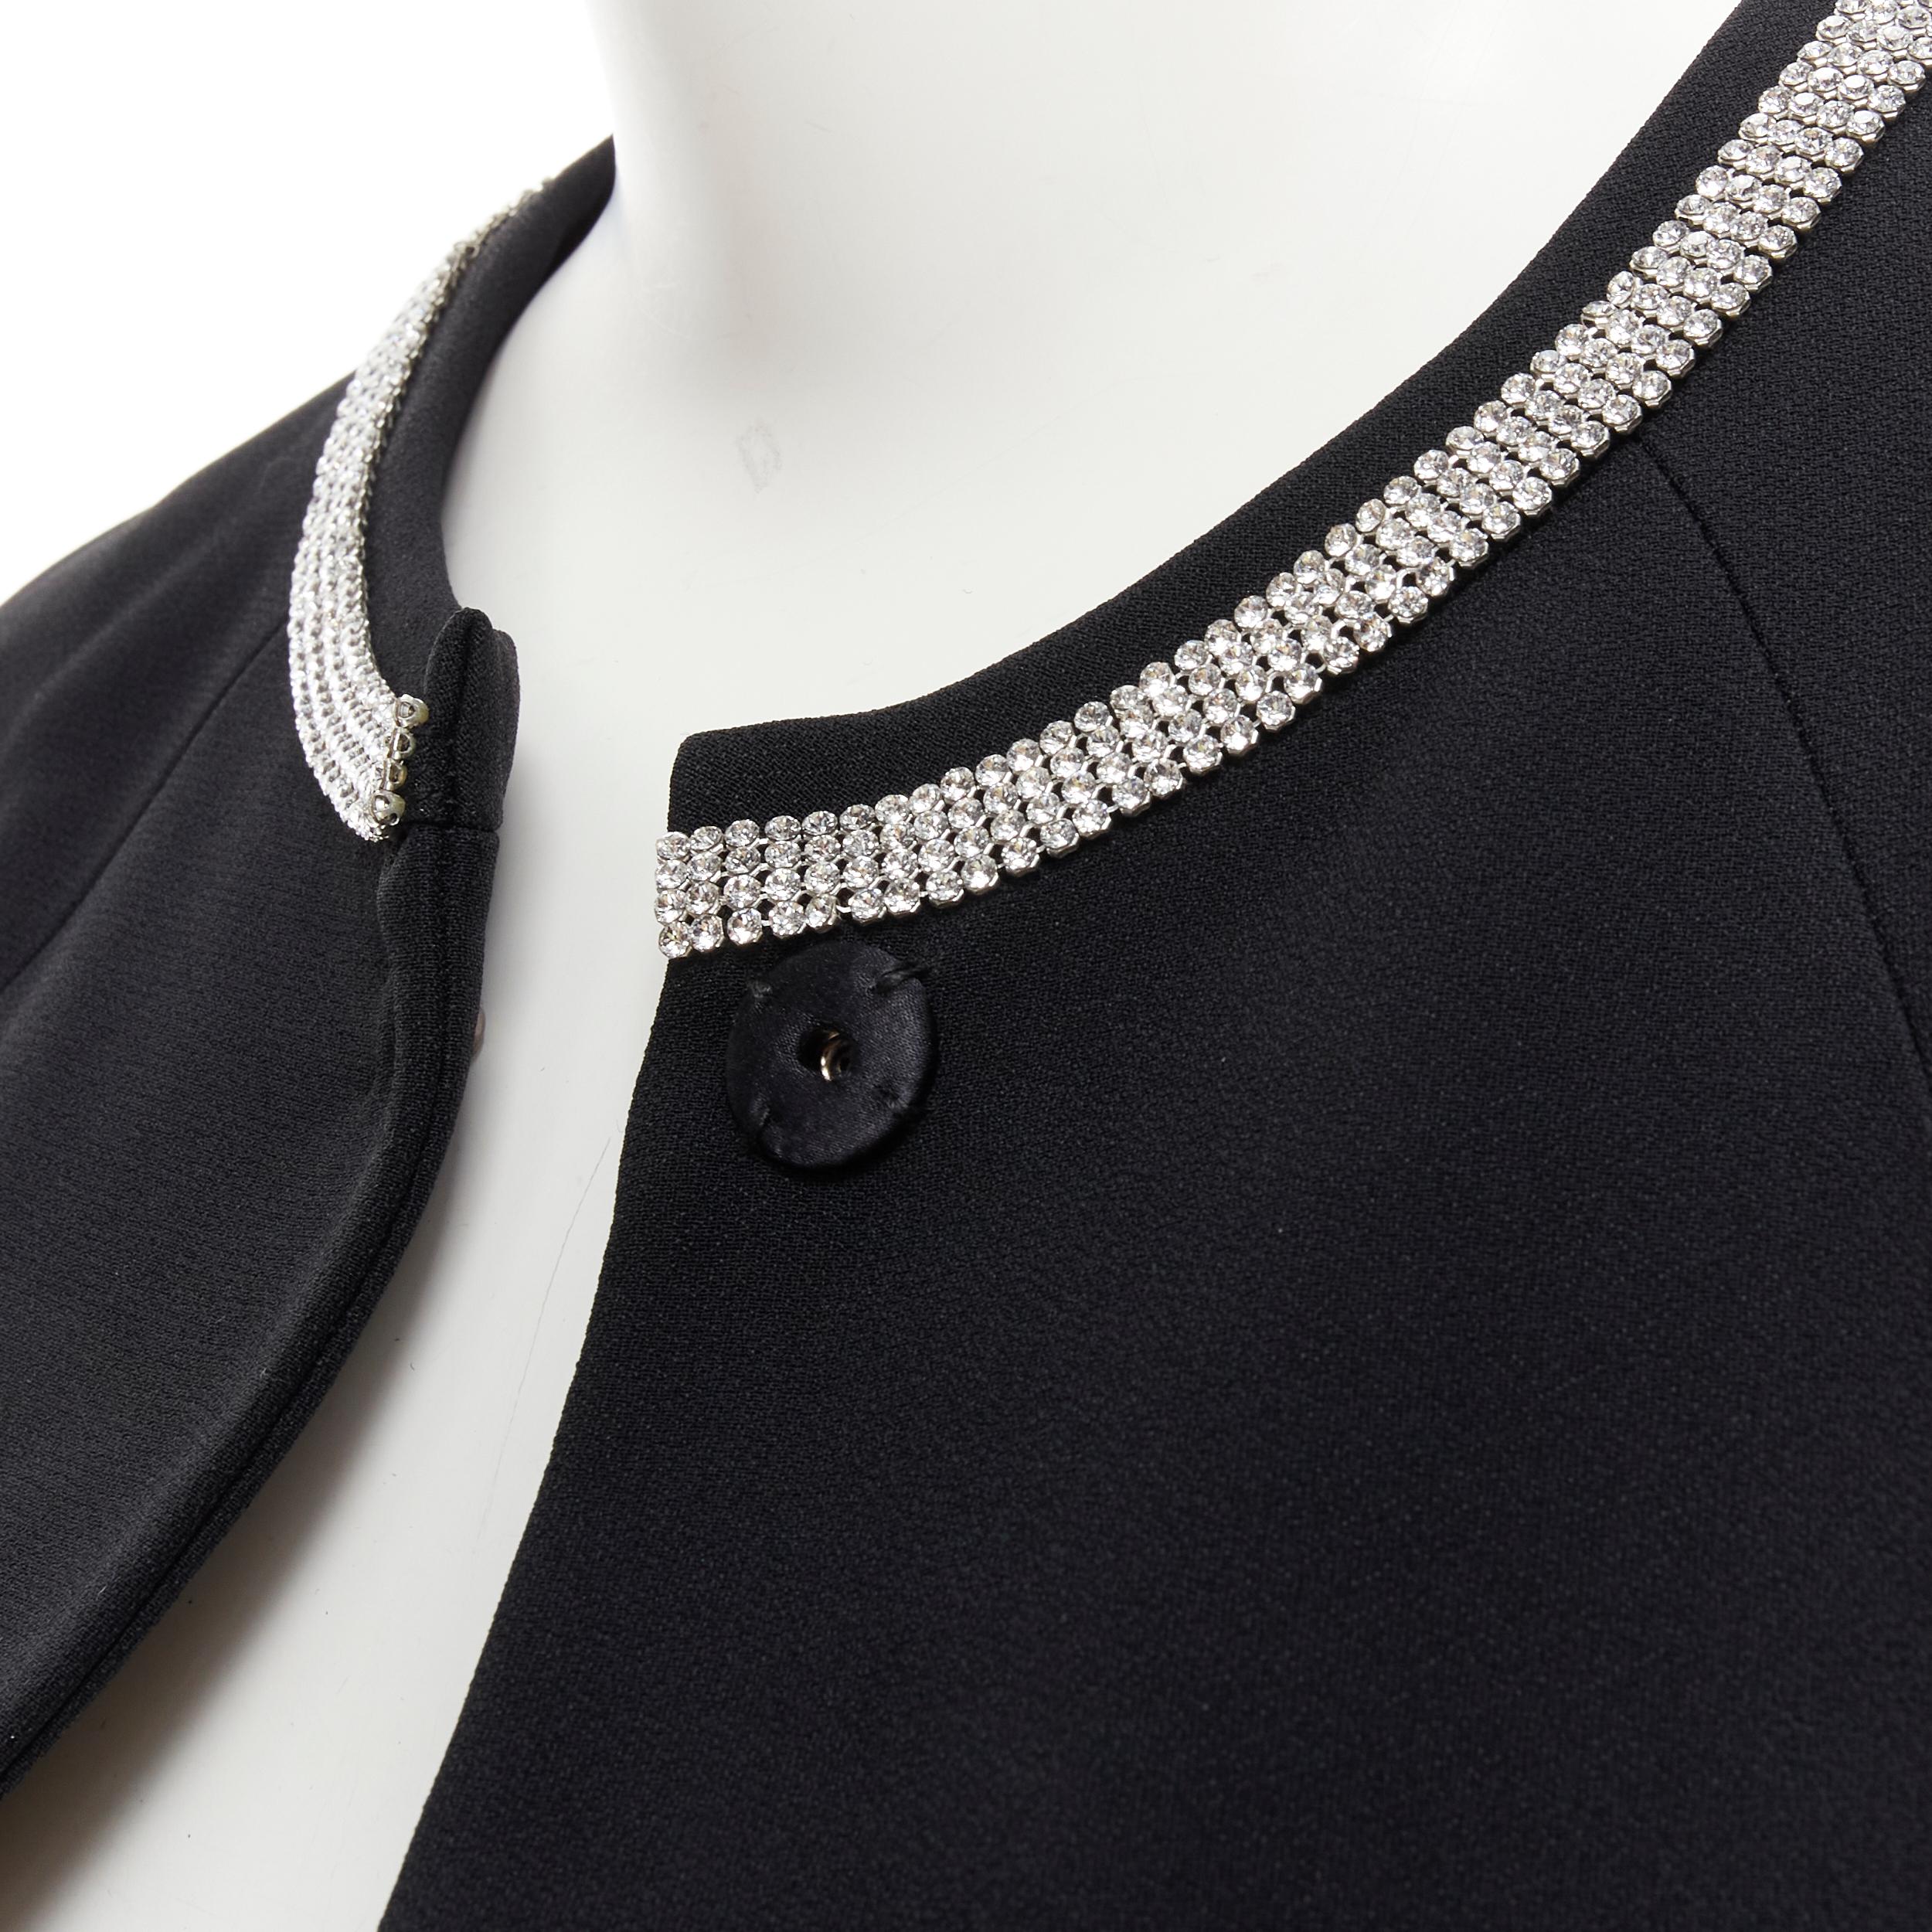 DOLCE GABBANA black silver crystal rhinestone collar cuff dinner jacket IT36 XS 
Reference: TGAS/B02047 
Brand: Dolce Gabbana 
Material: Acetate 
Color: Black 
Pattern: Solid 
Closure: Snap 
Extra Detail: Rhinestone crystal embellishment at collar